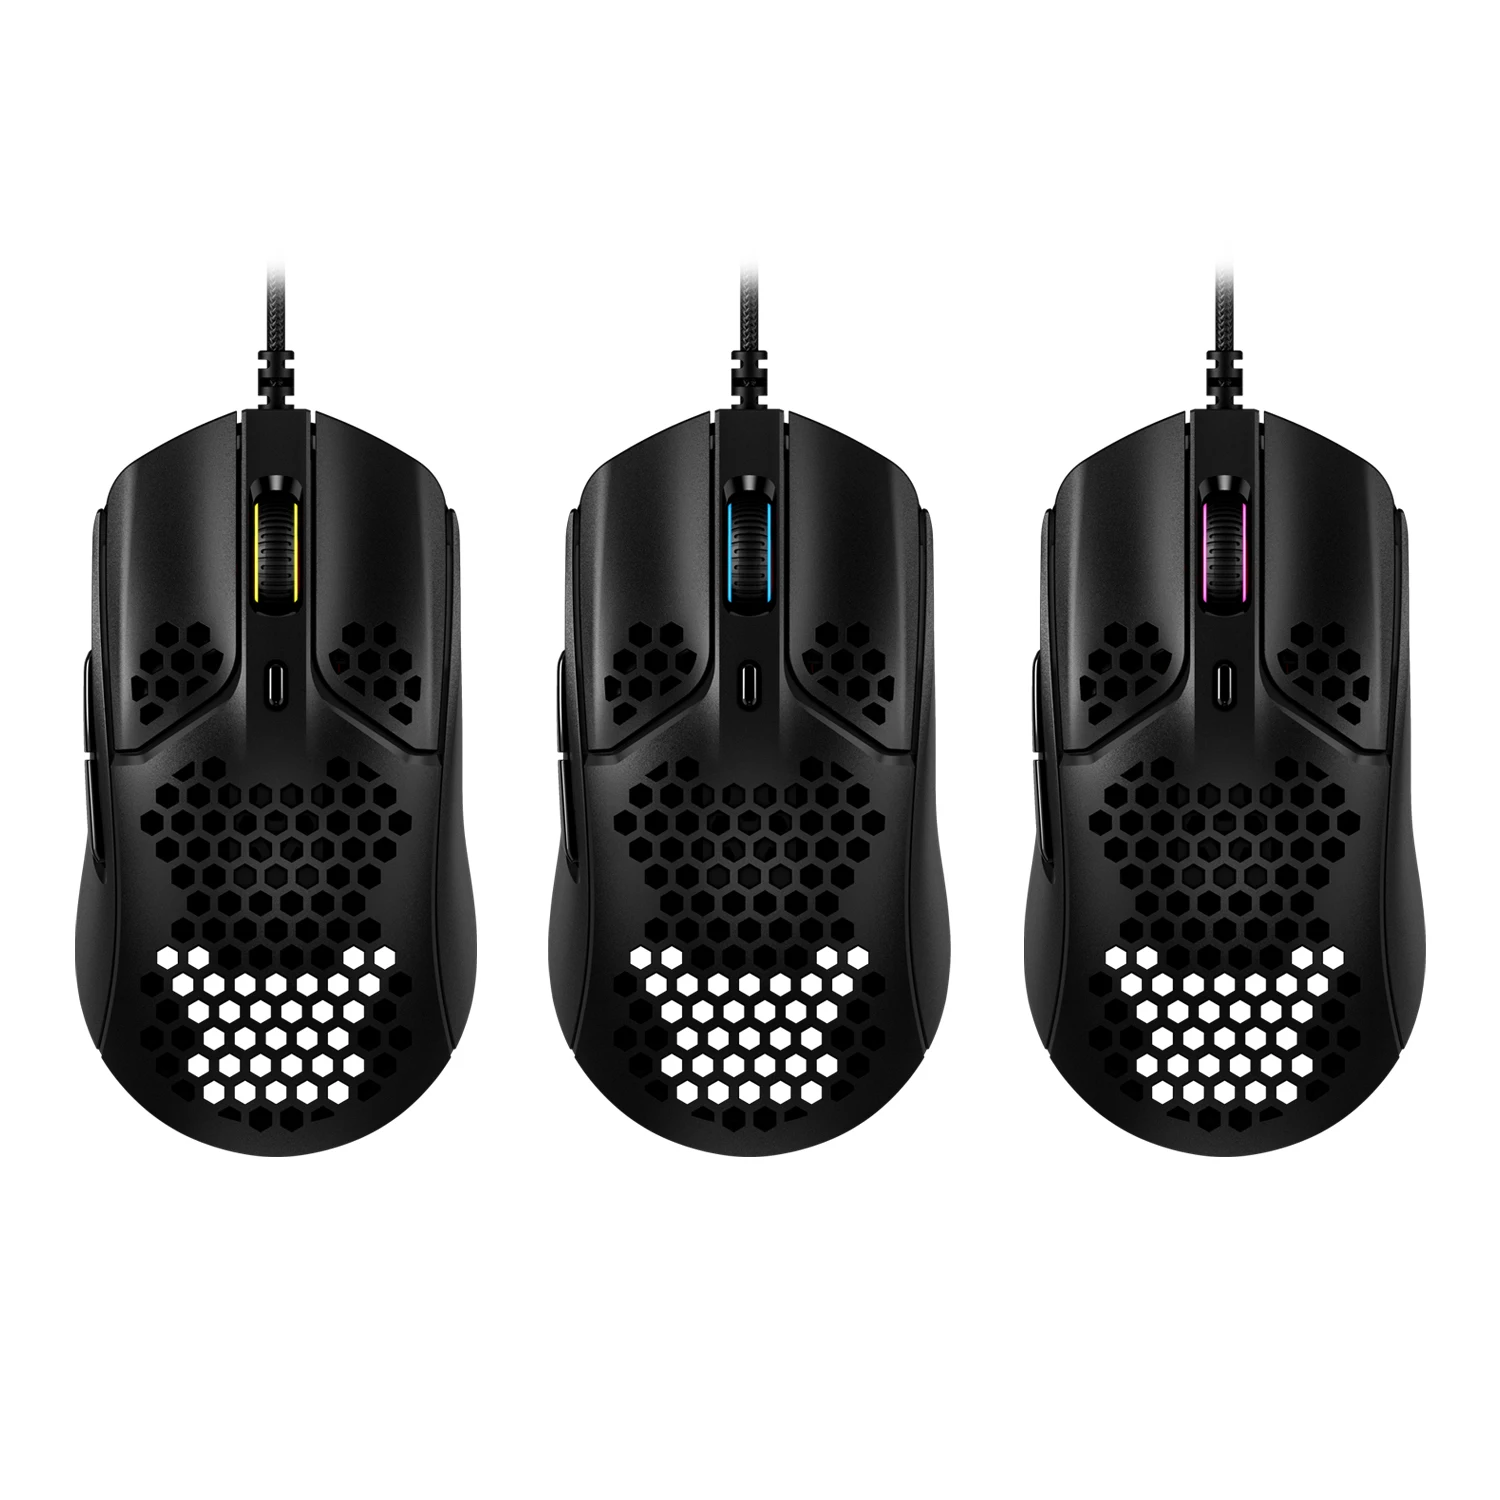 silent computer mouse HyperX Pulsefire Haste Gaming Mouse Ultra-light hex shell design wifi mouse for pc